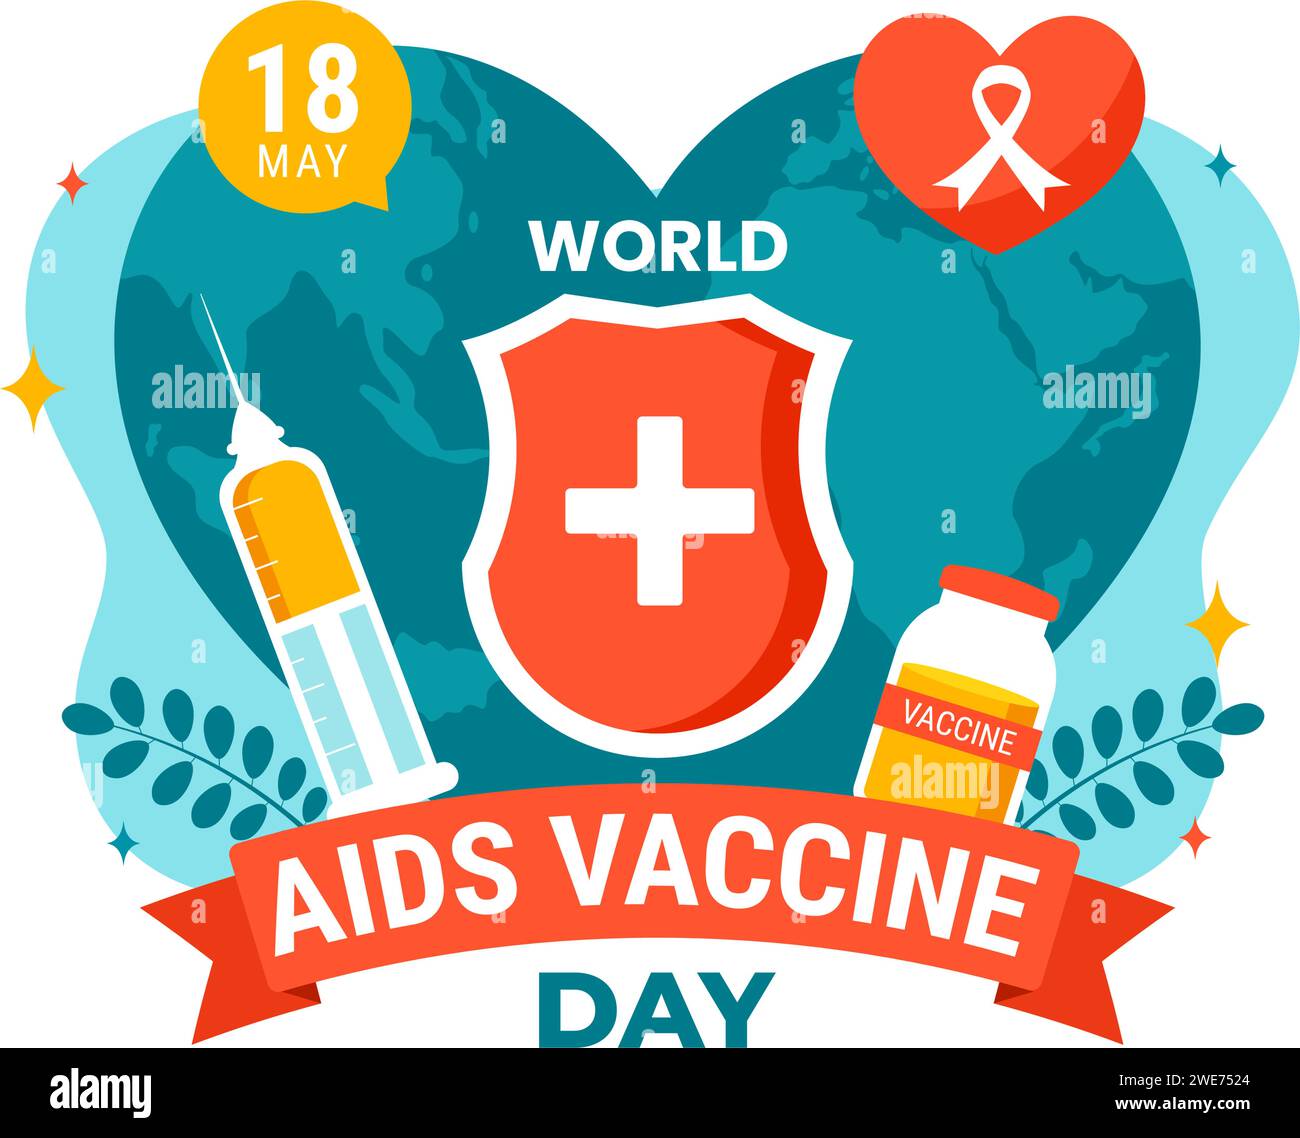 World Aids Vaccine Day Vector Illustration on 18 May with Injection to Prevention and Awareness Health Care in Flat Cartoon Background Design Stock Vector